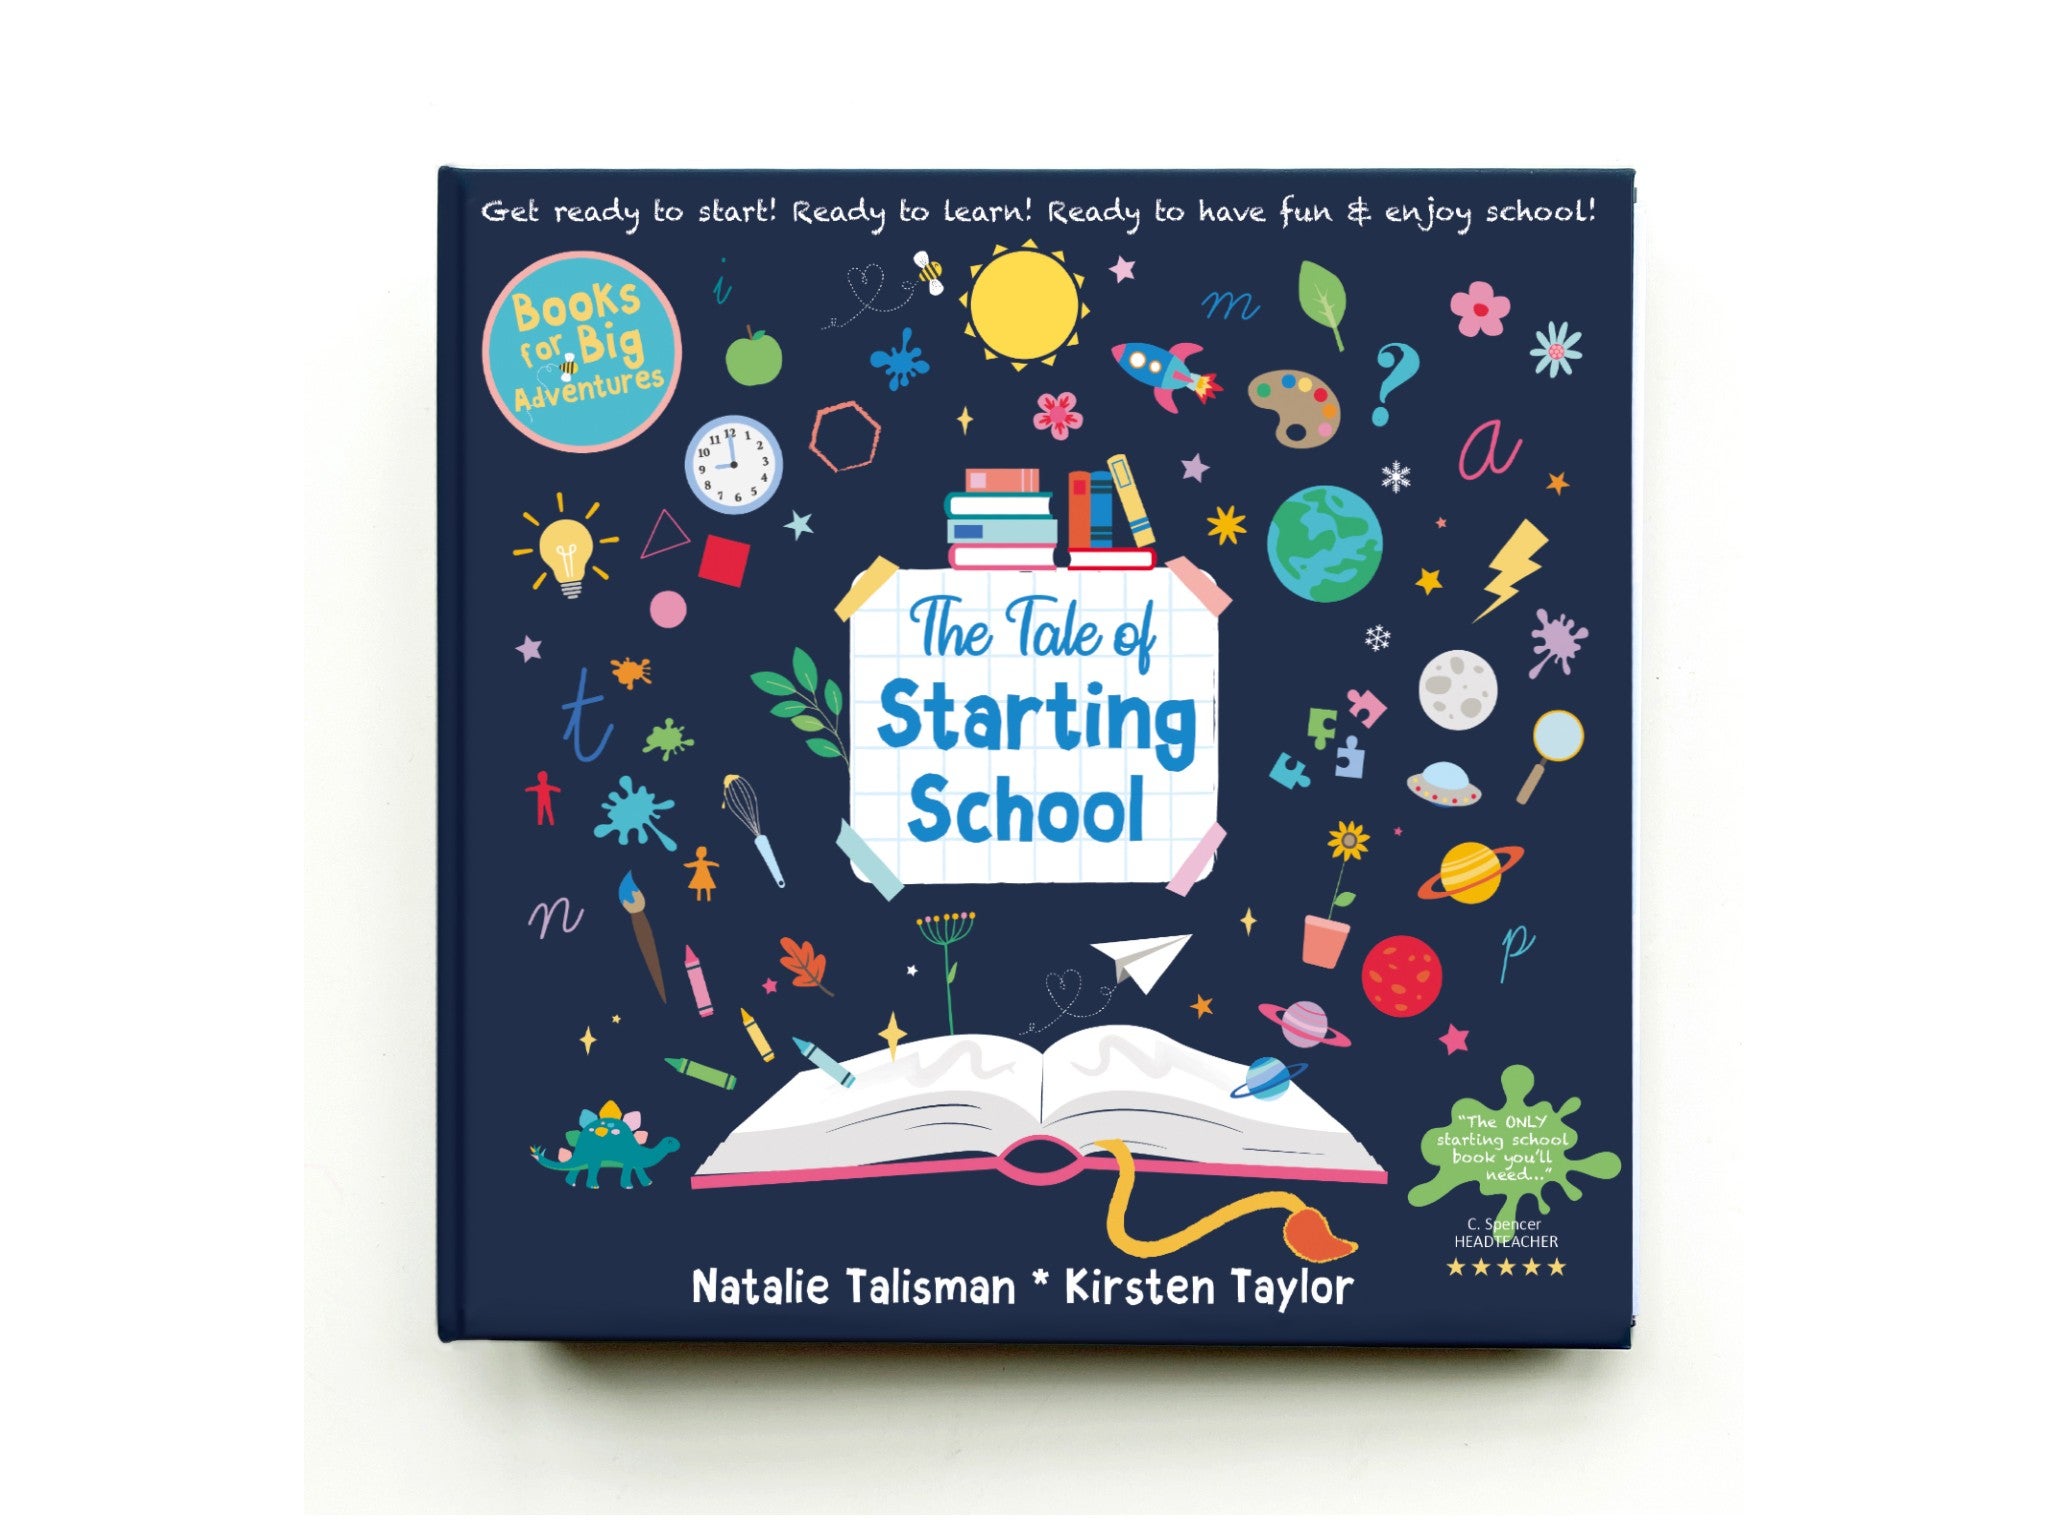 The Tale of Starting School by Natalie Talisman and Kirsten Taylor, published by Tales of Me indybest.jpeg